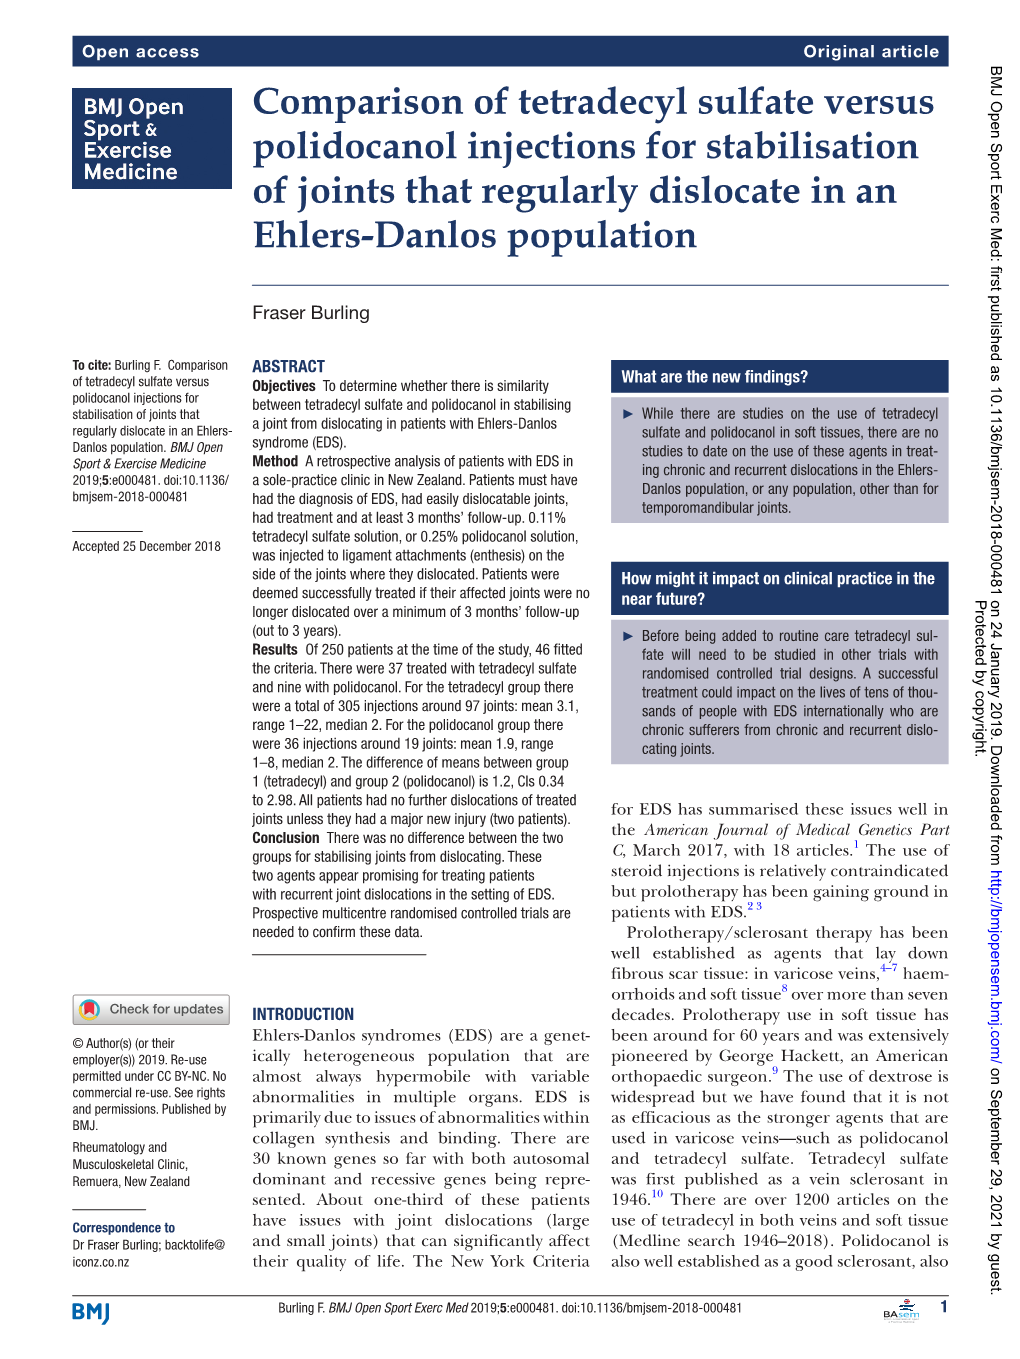 Comparison of Tetradecyl Sulfate Versus Polidocanol Injections for Stabilisation of Joints That Regularly Dislocate in an Ehlers-Danlos Population